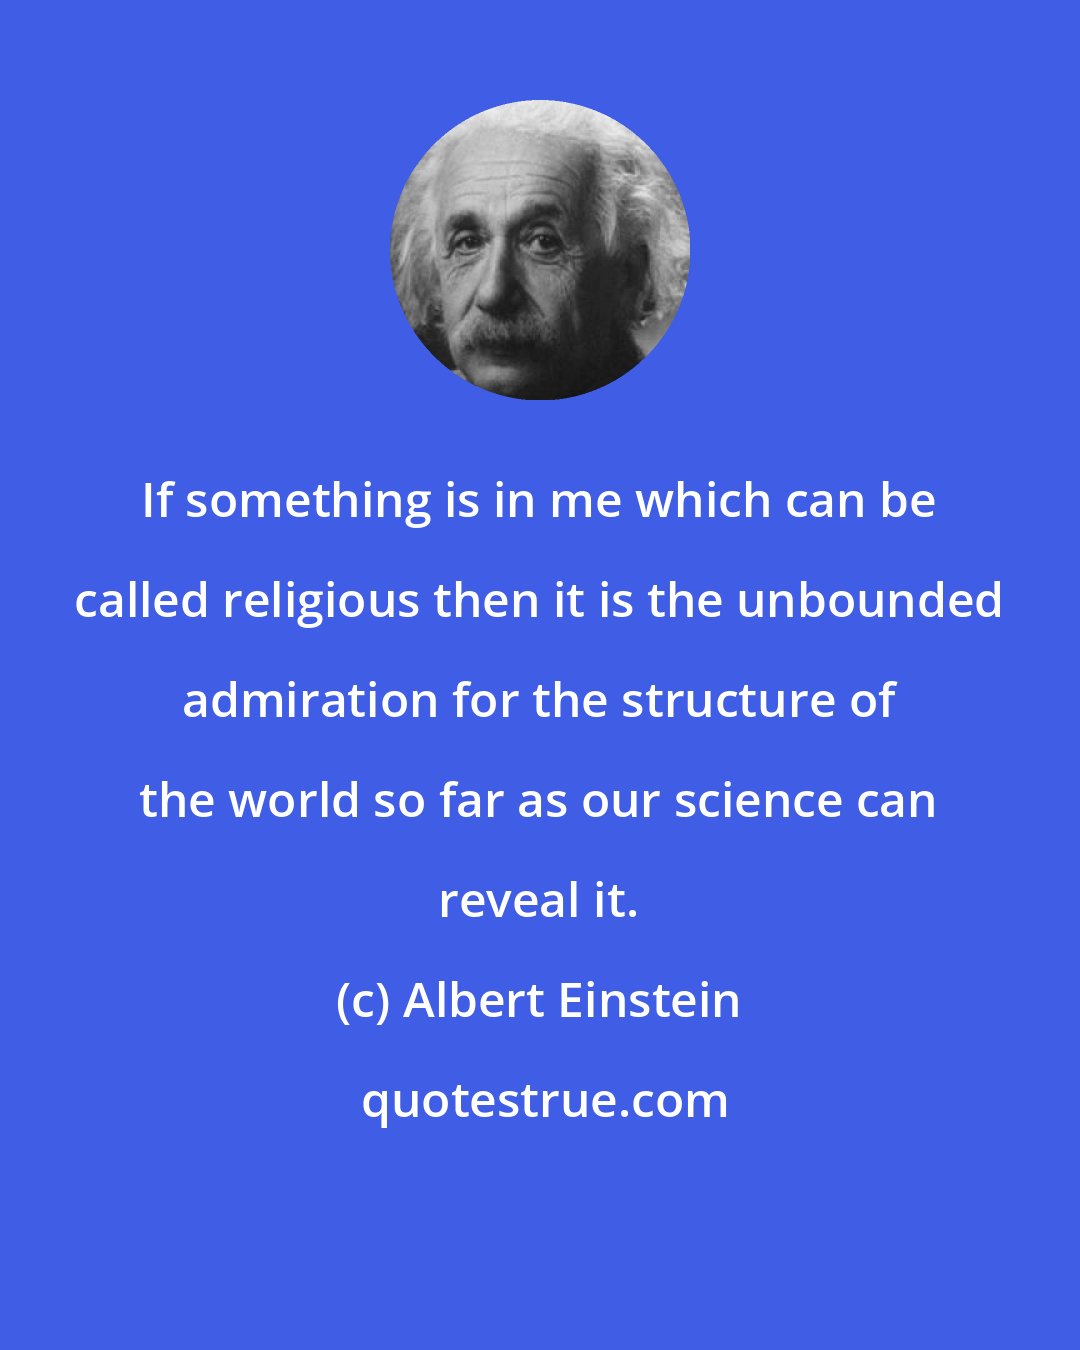 Albert Einstein: If something is in me which can be called religious then it is the unbounded admiration for the structure of the world so far as our science can reveal it.